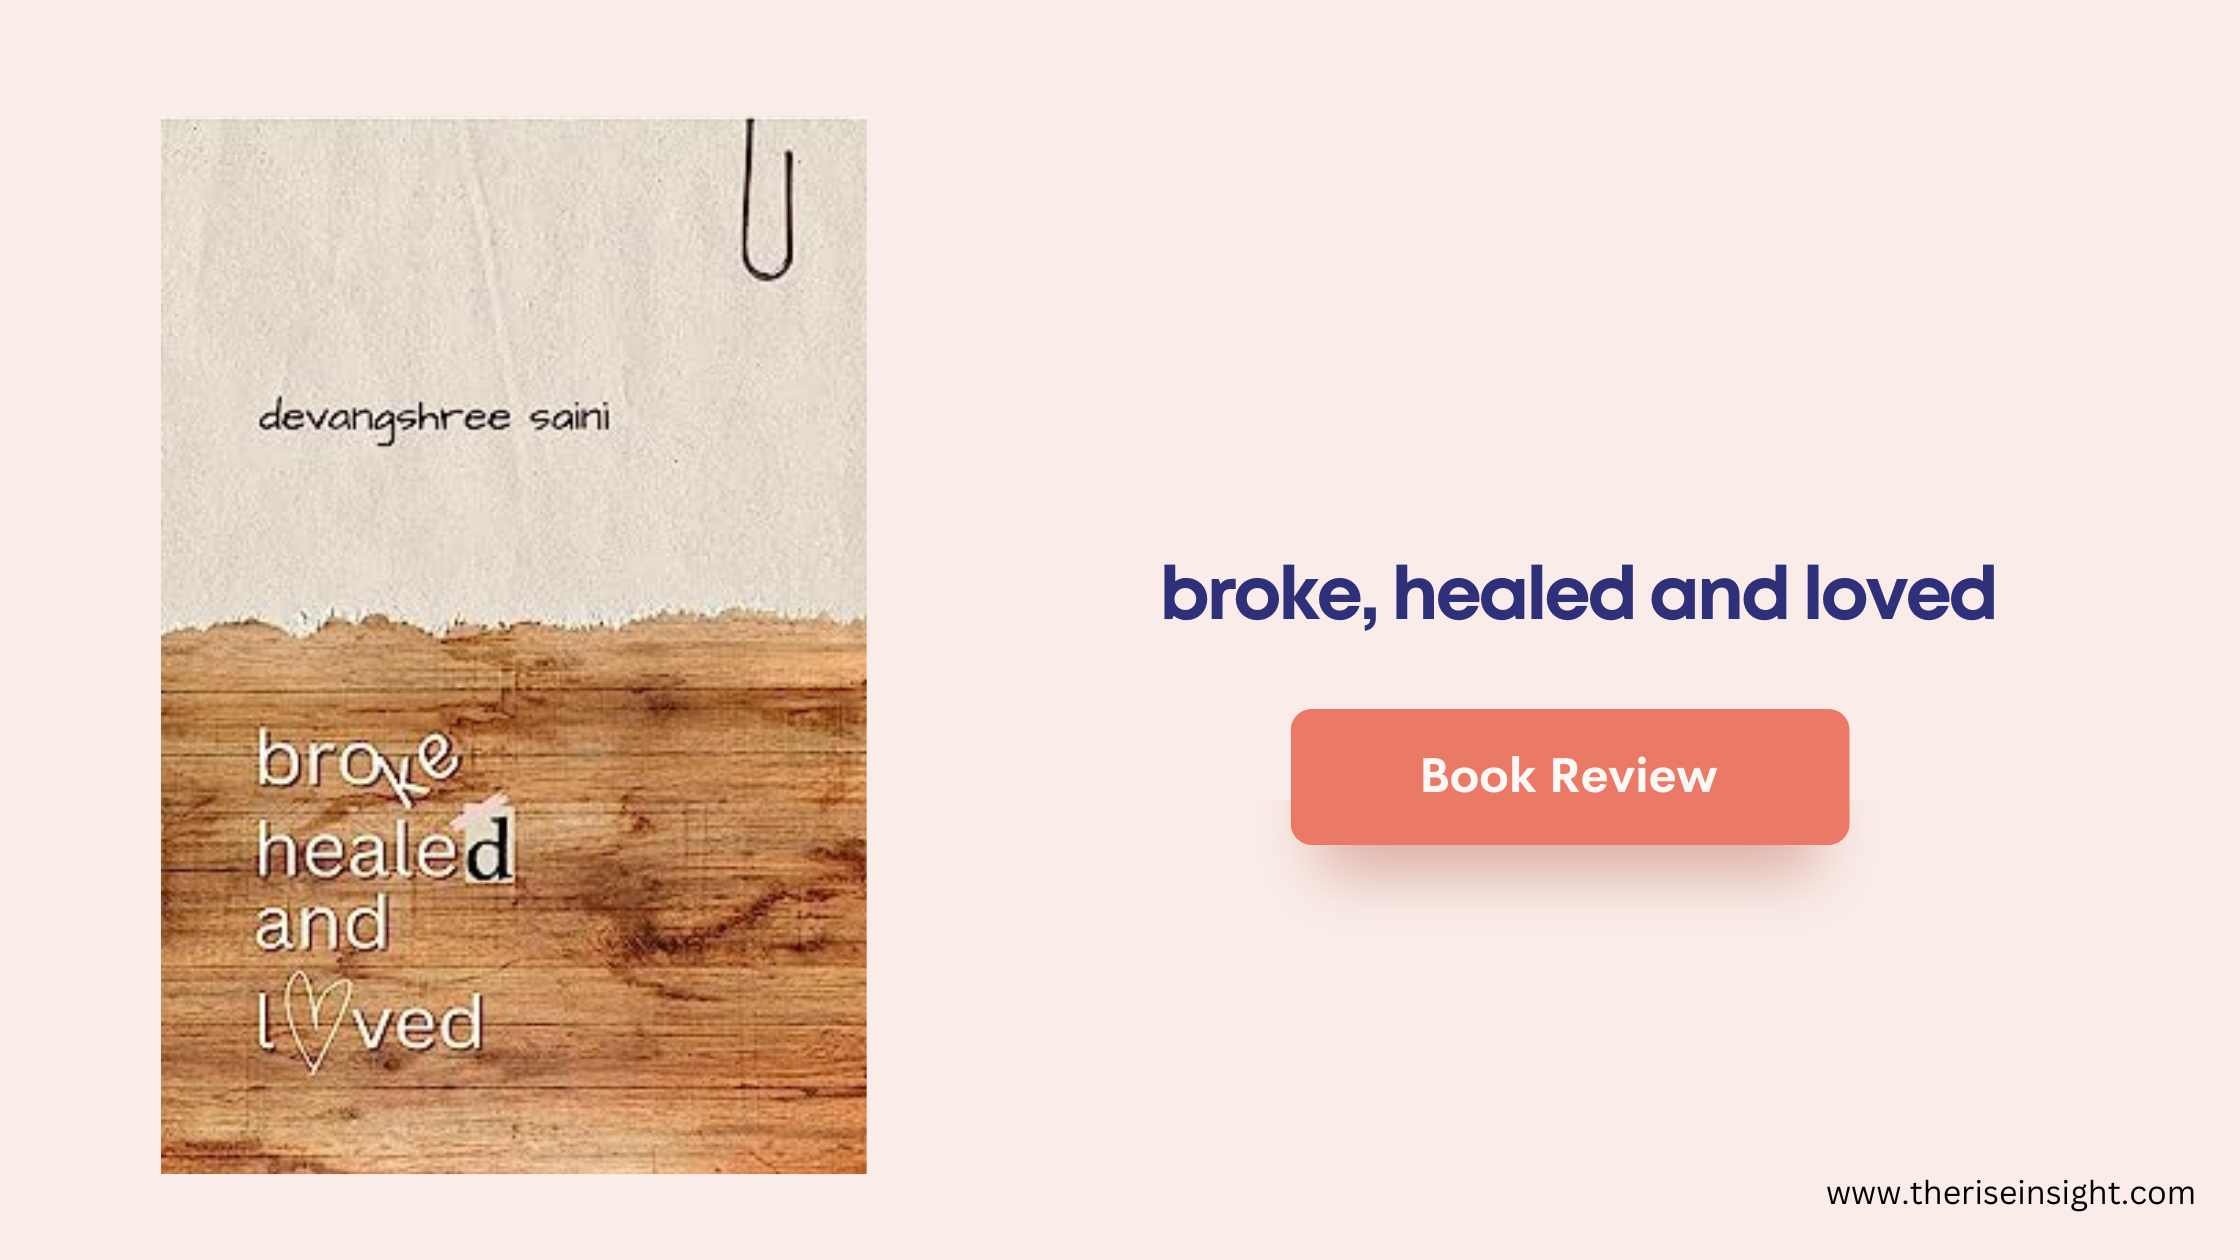 A Journey of Resilience and Transformation: “Broke, Healed and Loved” by Devangshree Saini